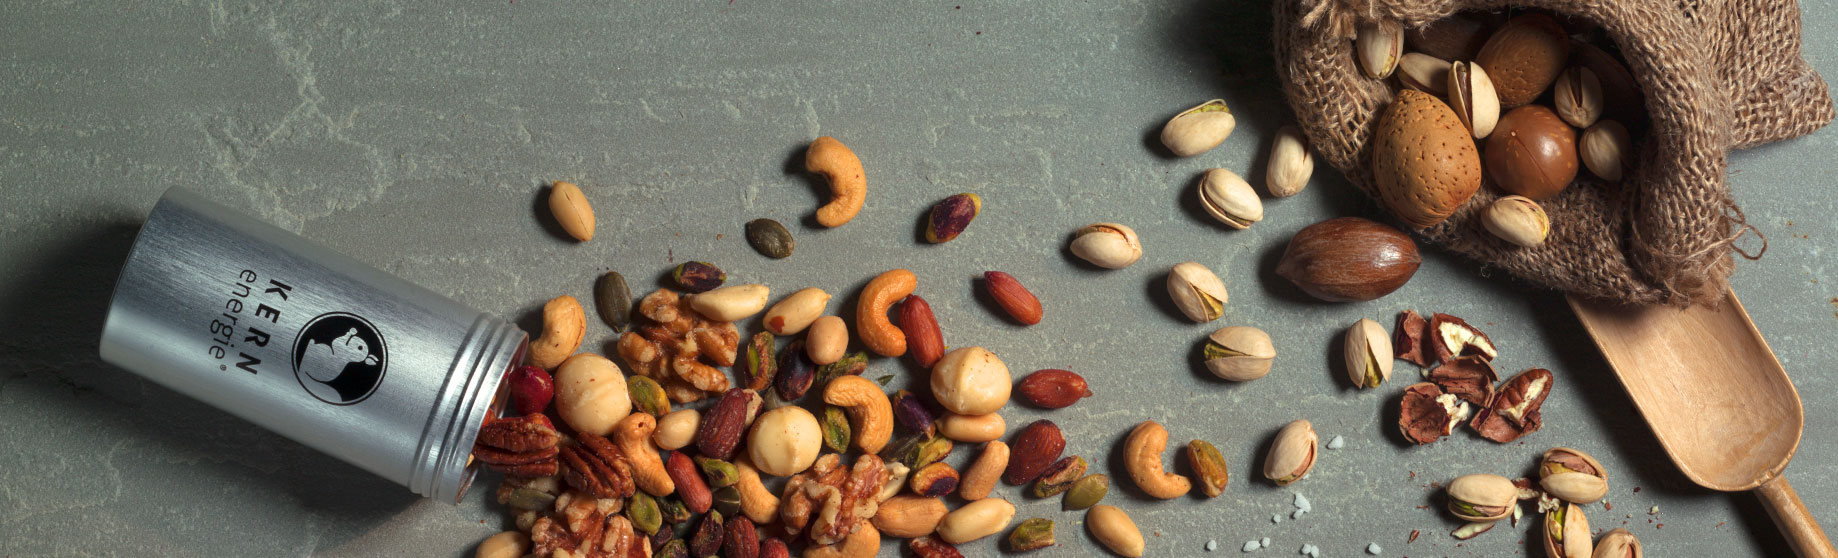 Exquisite Cafés and Gourmet Nuts from KERNenergie - A Perfect Match